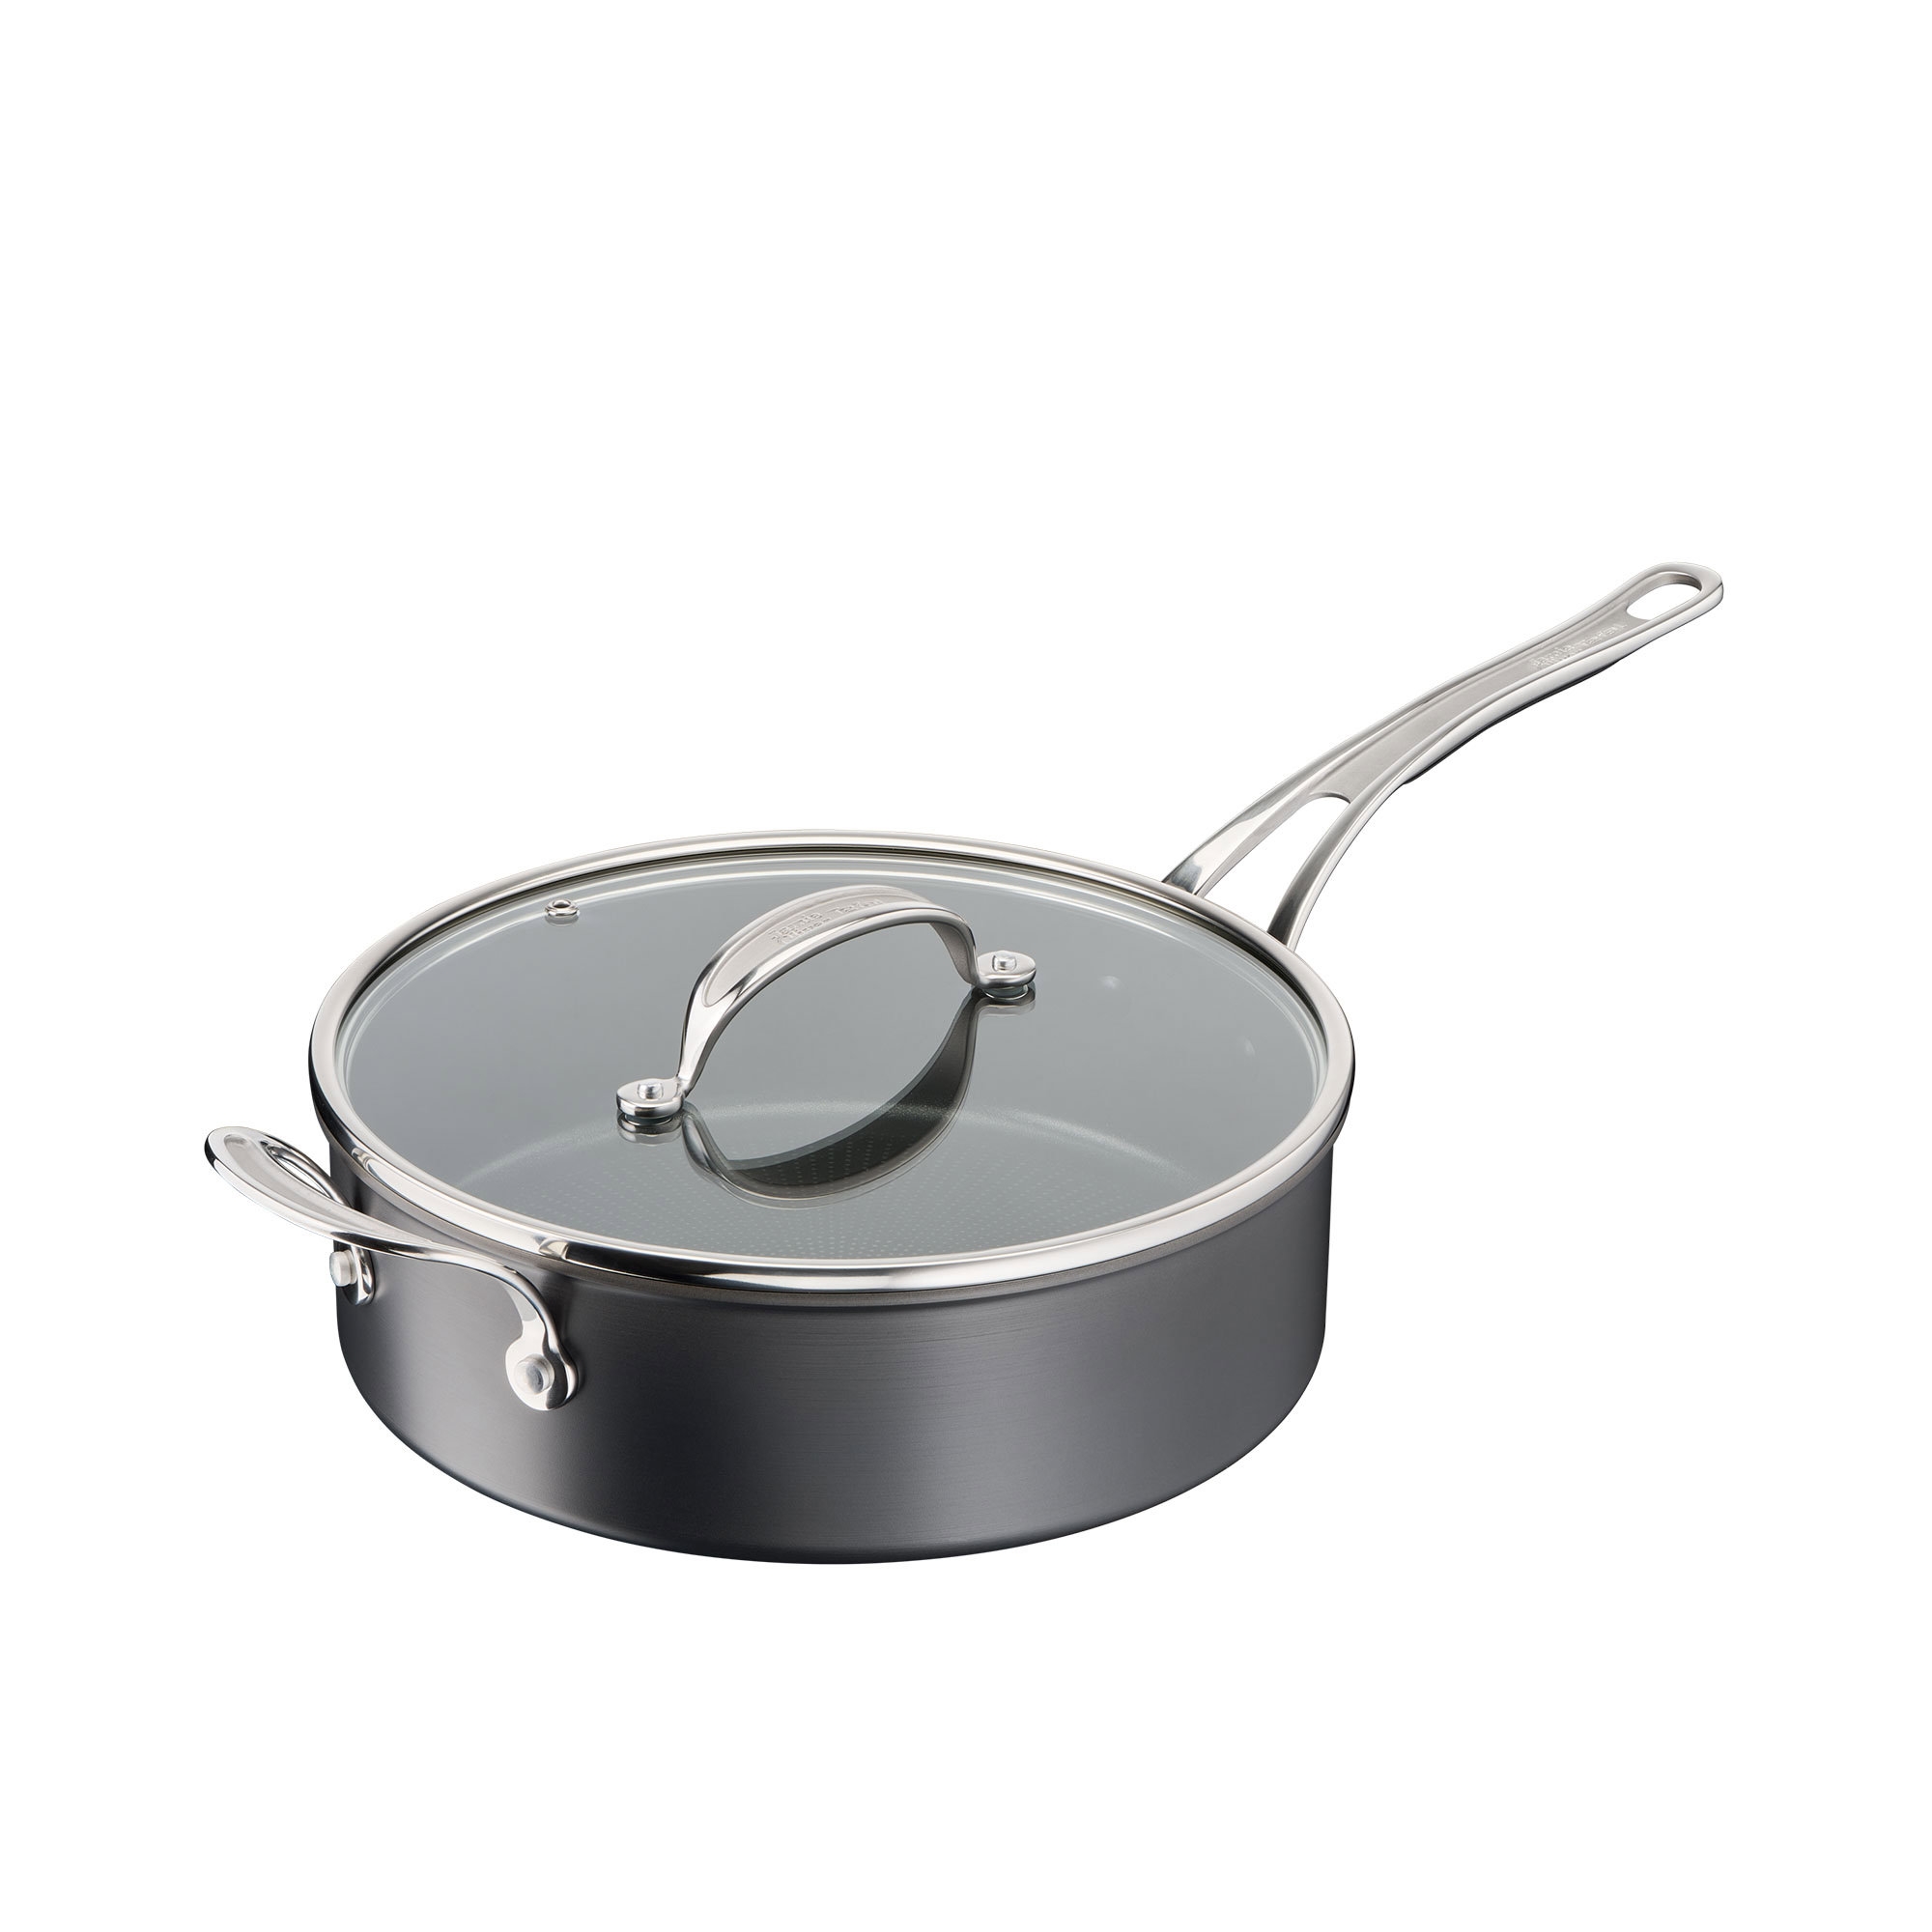 Jamie Oliver by Tefal Cook's Classic Hard Anodised Induction Saute Pan 26cm Image 1